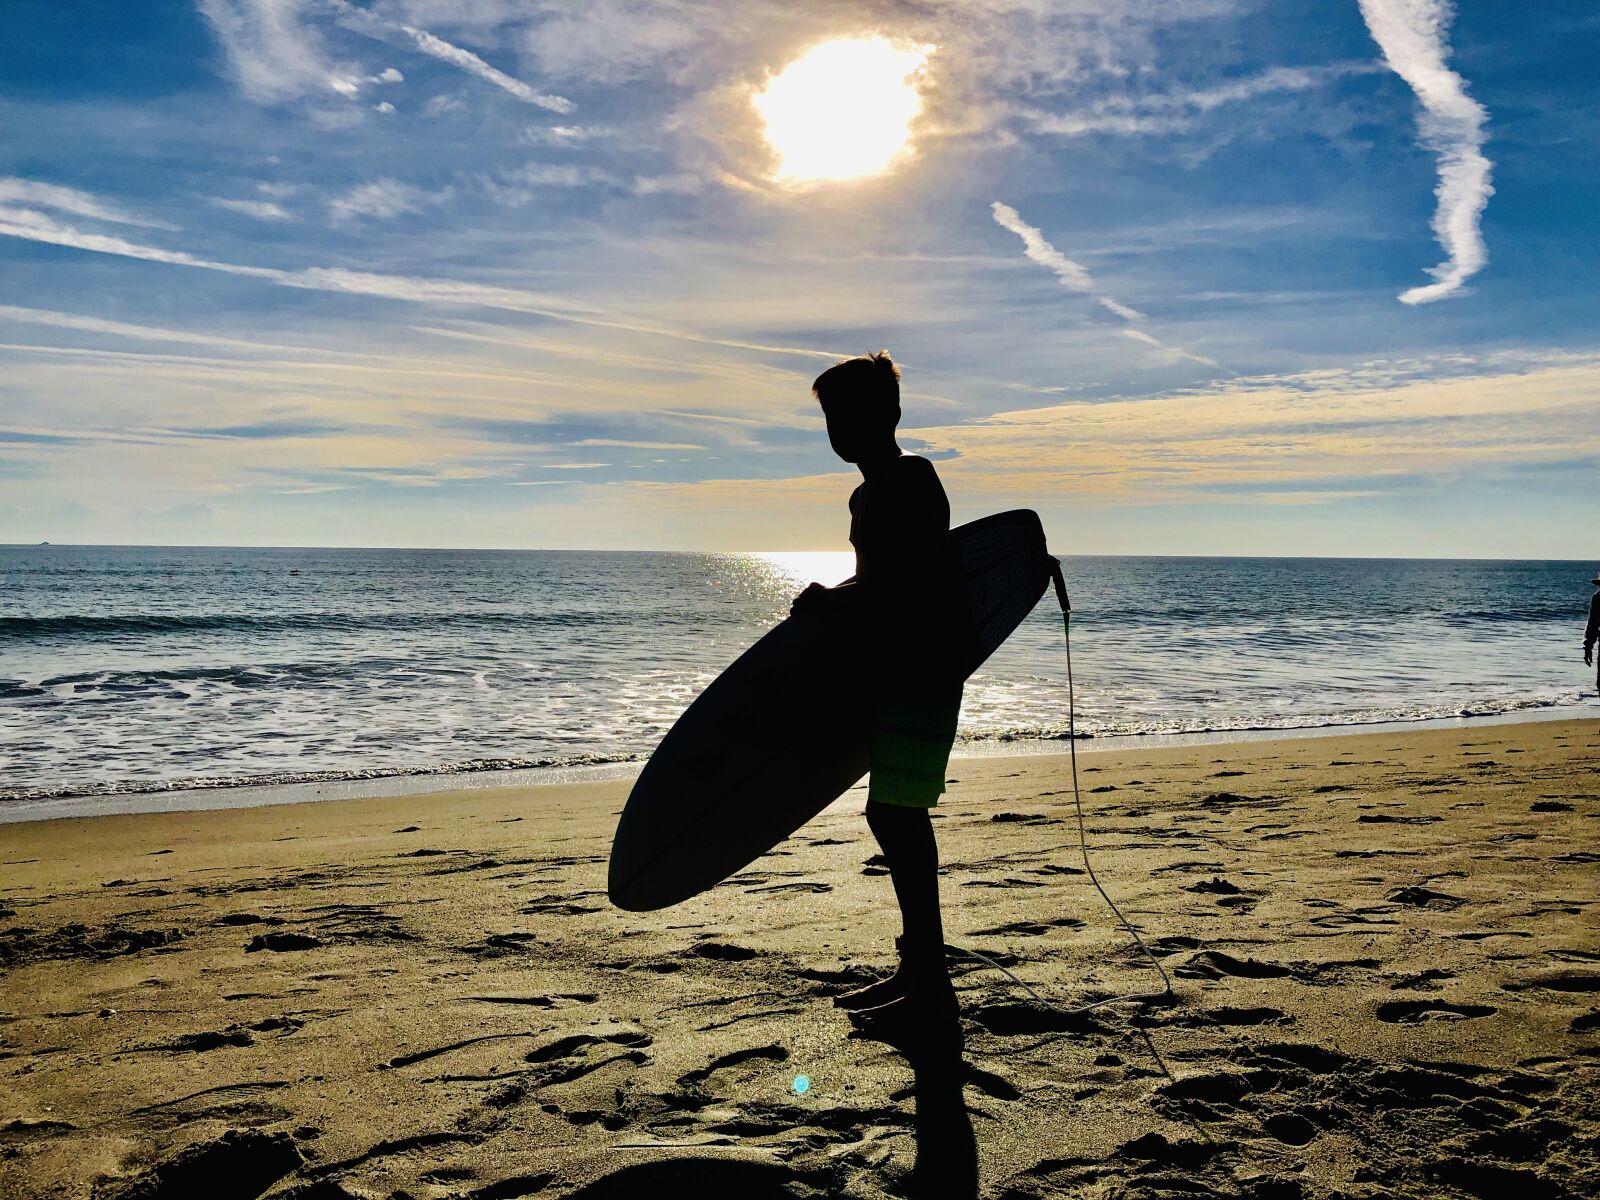 Apple iPhone X sample photo. Ocean, surfer, wave photography